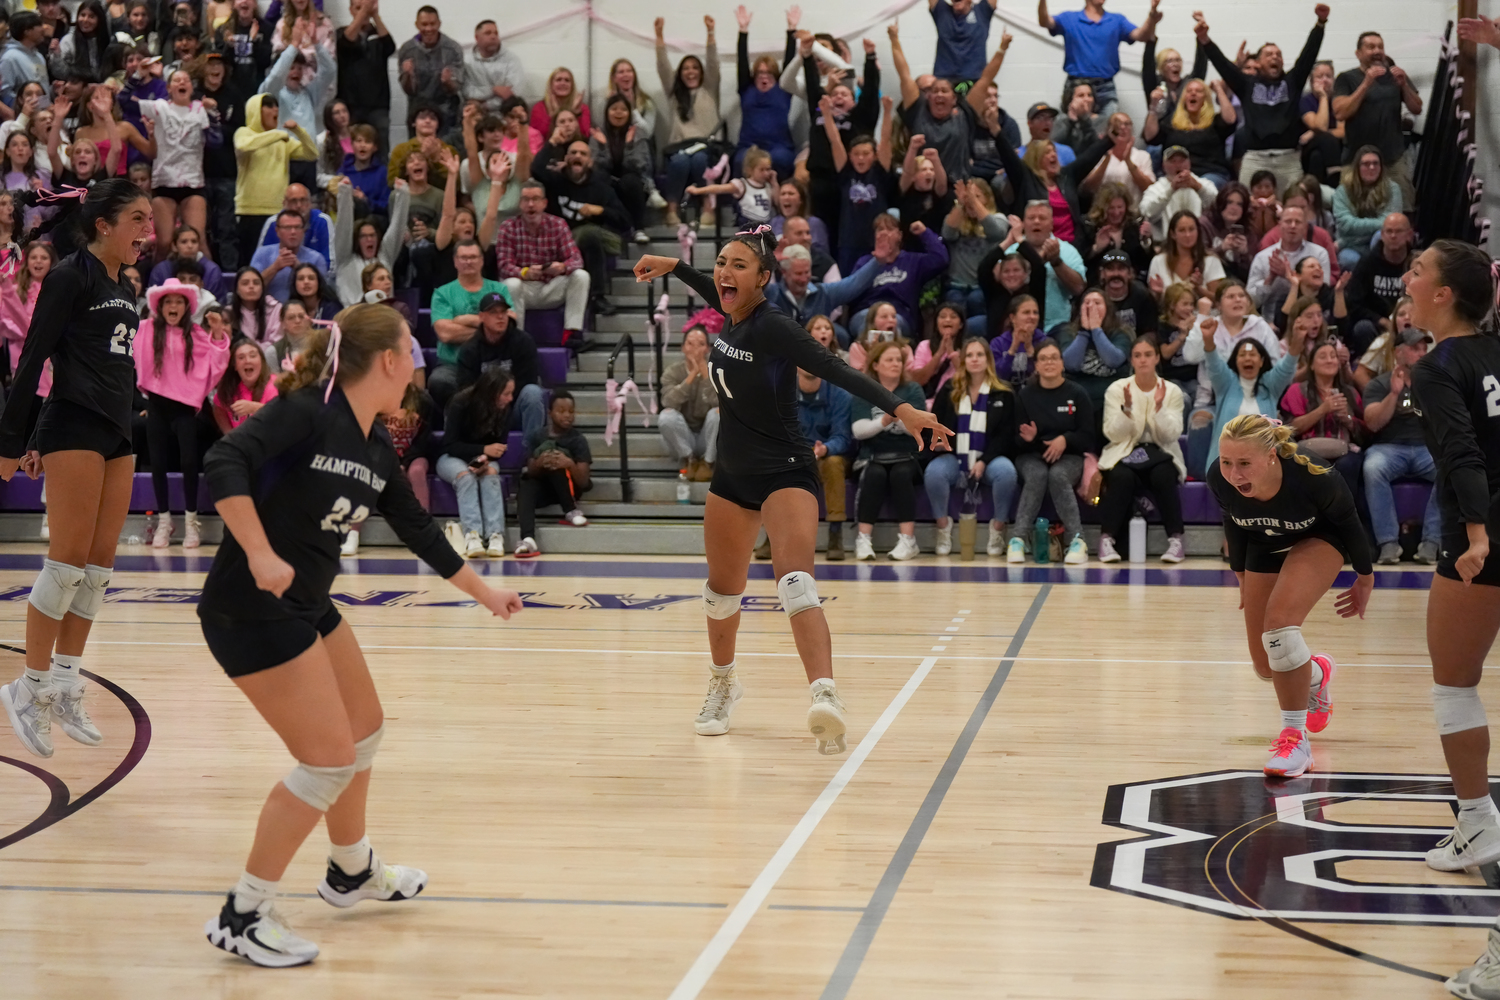 Hampton Bays' girls volleyball team celebrates its first win over Bayport-Blue Point. RON ESPOSITO